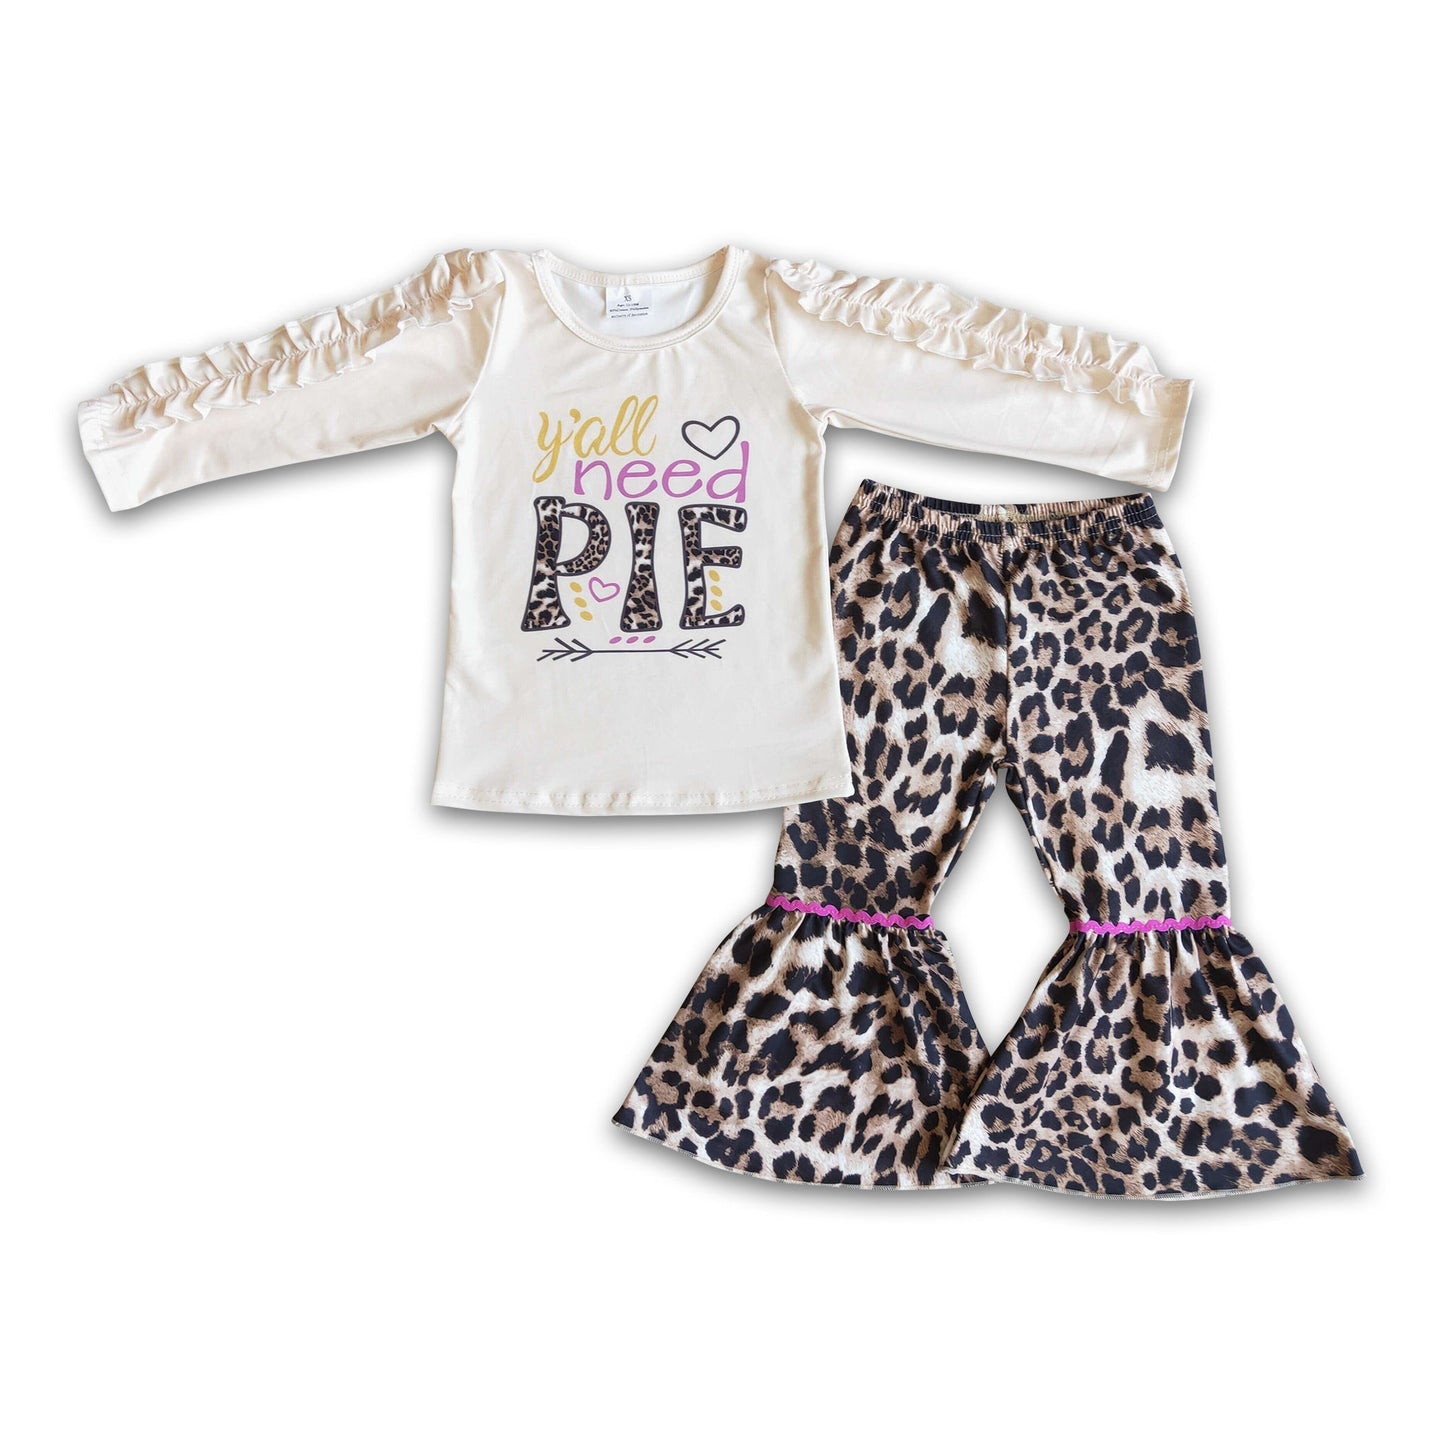 Y'all need pie ruffle sleeve shirt leopard pants girls boutique clothing